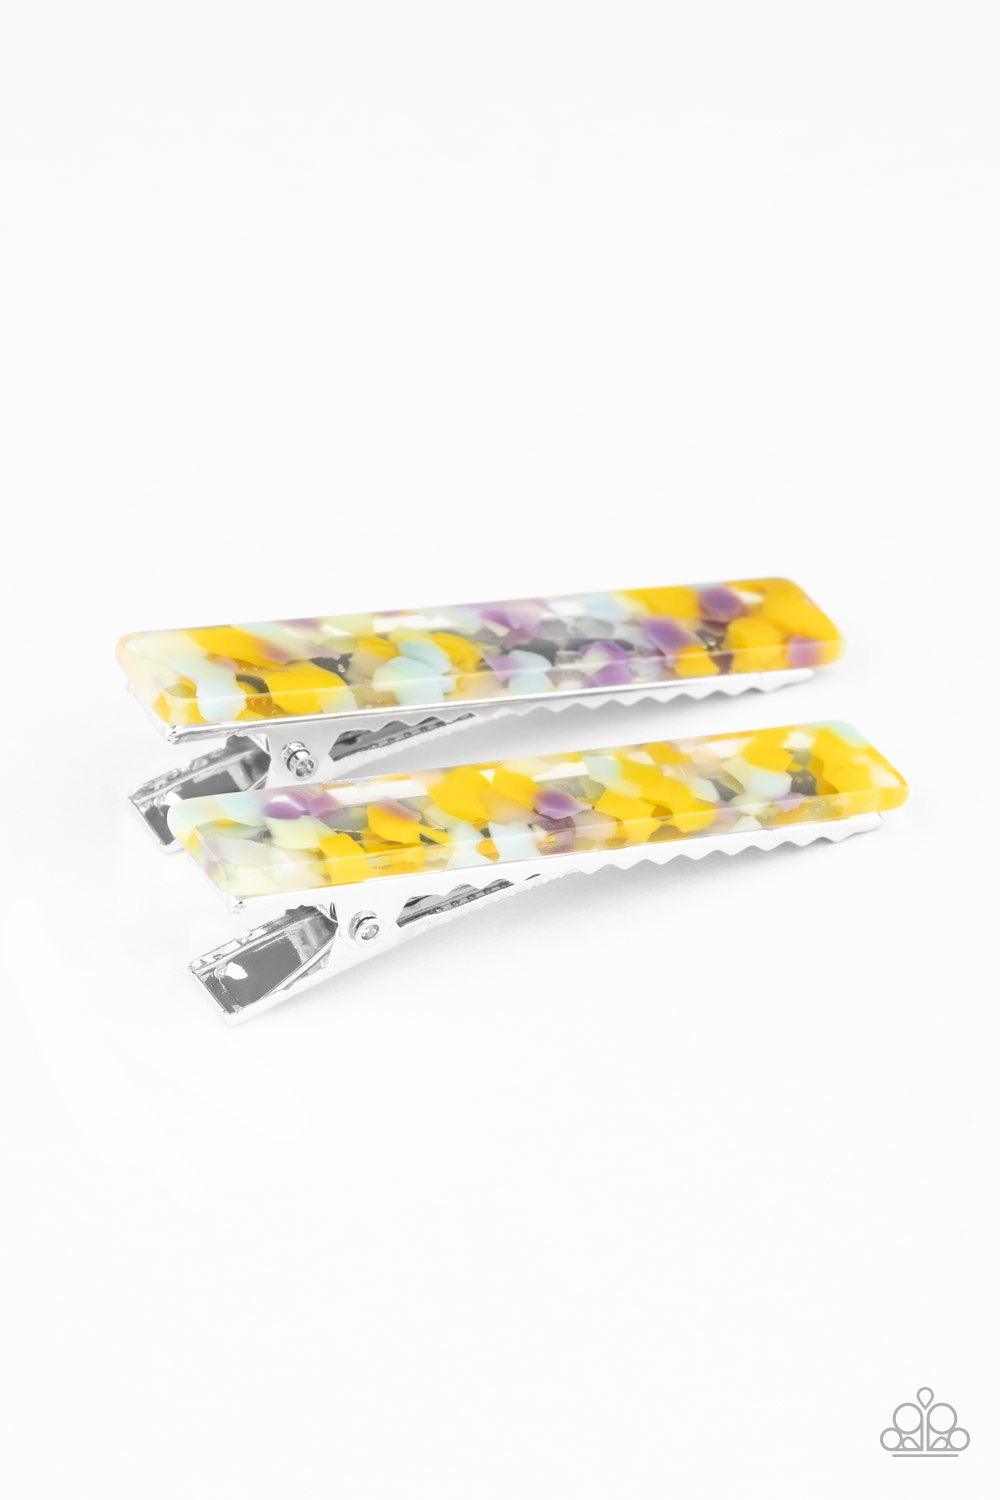 Paparazzi Accessories Get Outta HAIR! - Multi Speckled in smudges of yellow, green, blue, and purple dots, a pair of clear acrylic frames pins back the hair for a colorfully retro look. Features standard hair clips on the back. Color may vary. Hair Access